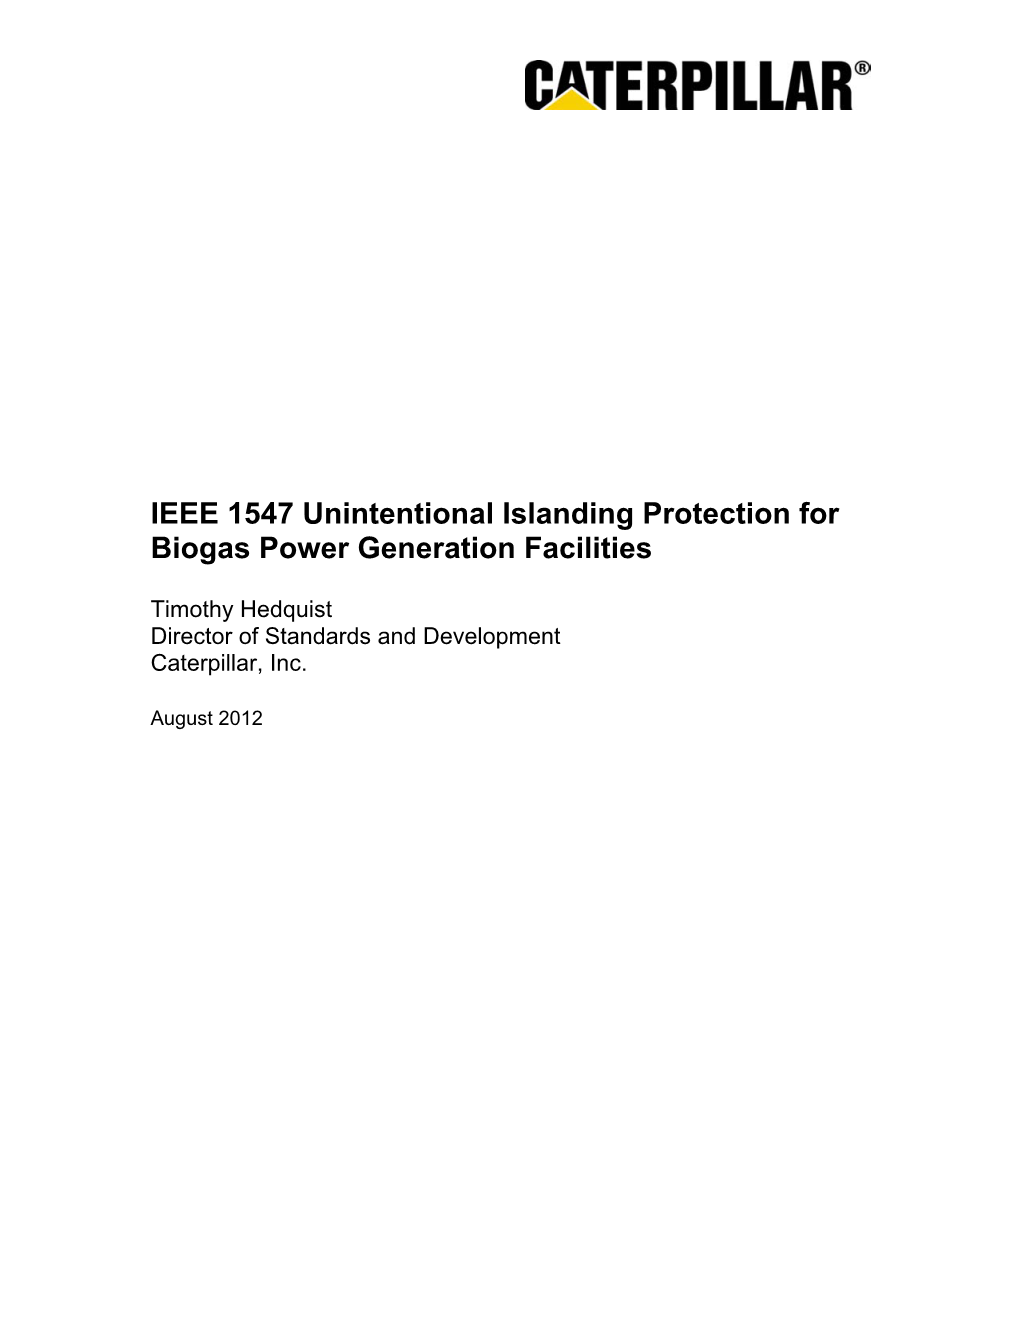 IEEE 1547 Unintentional Islanding Protection for Biogas Power Generation Facilities